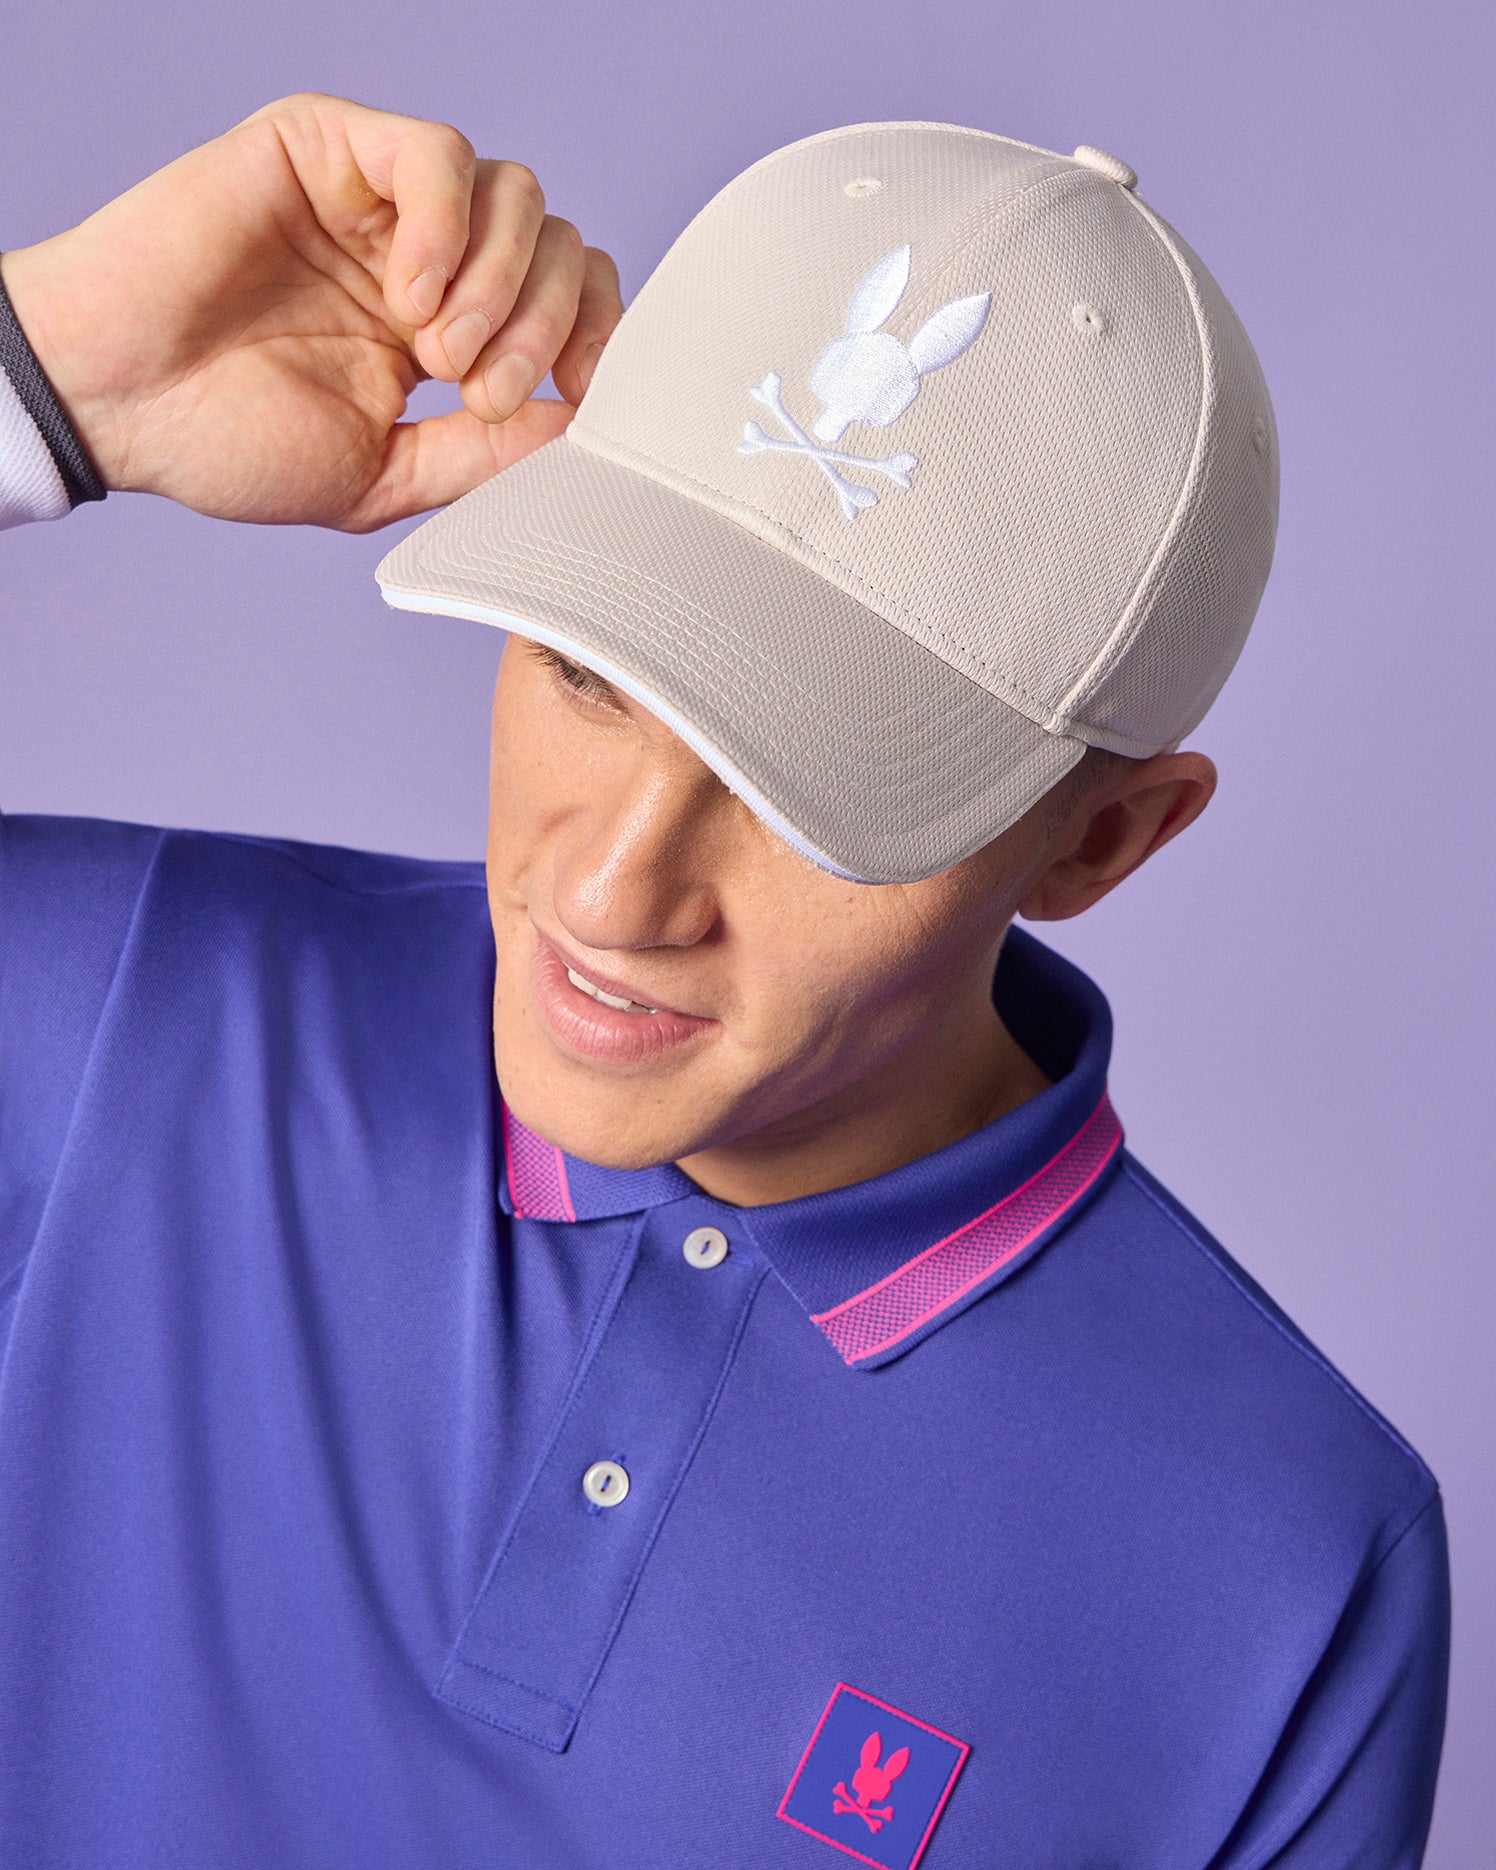 A young man in a blue polo shirt playfully tips his Psycho Bunny Men's Dover Sport Cap - B6A285B2HT, adorned with embroidered white rabbit logos, against a complementary purple background.